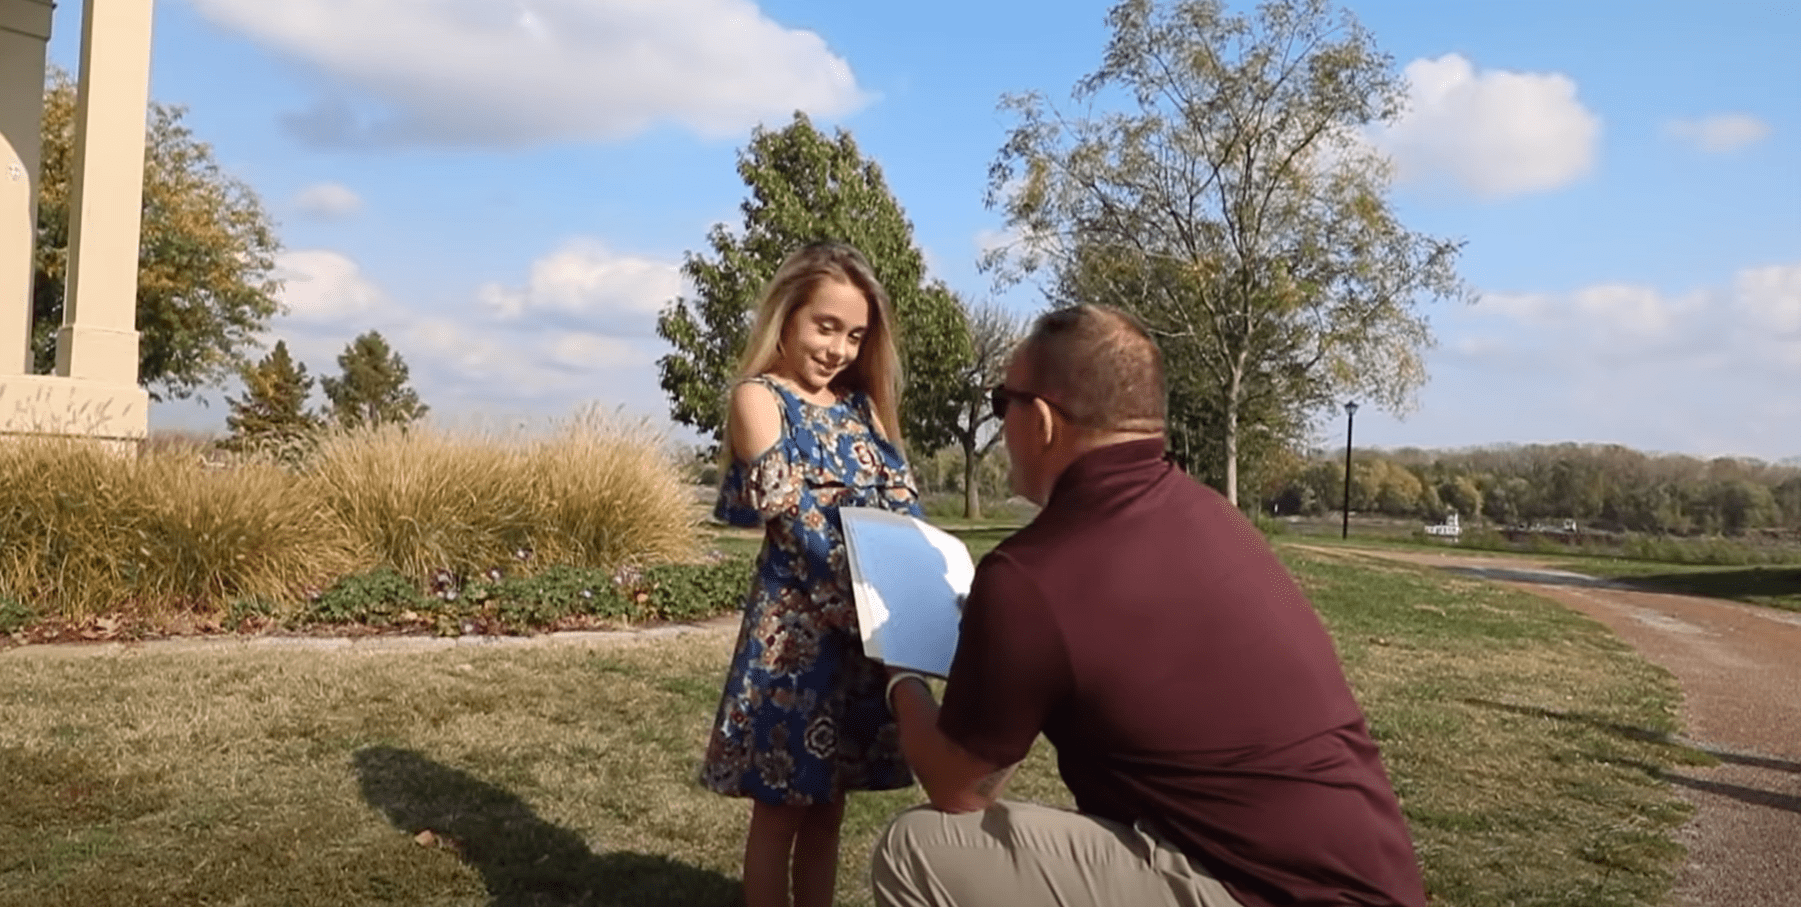 Tim kneels in front of Kylee during their family photoshoot to read a letter. | Source: youtube.com/Tim Bobbitt